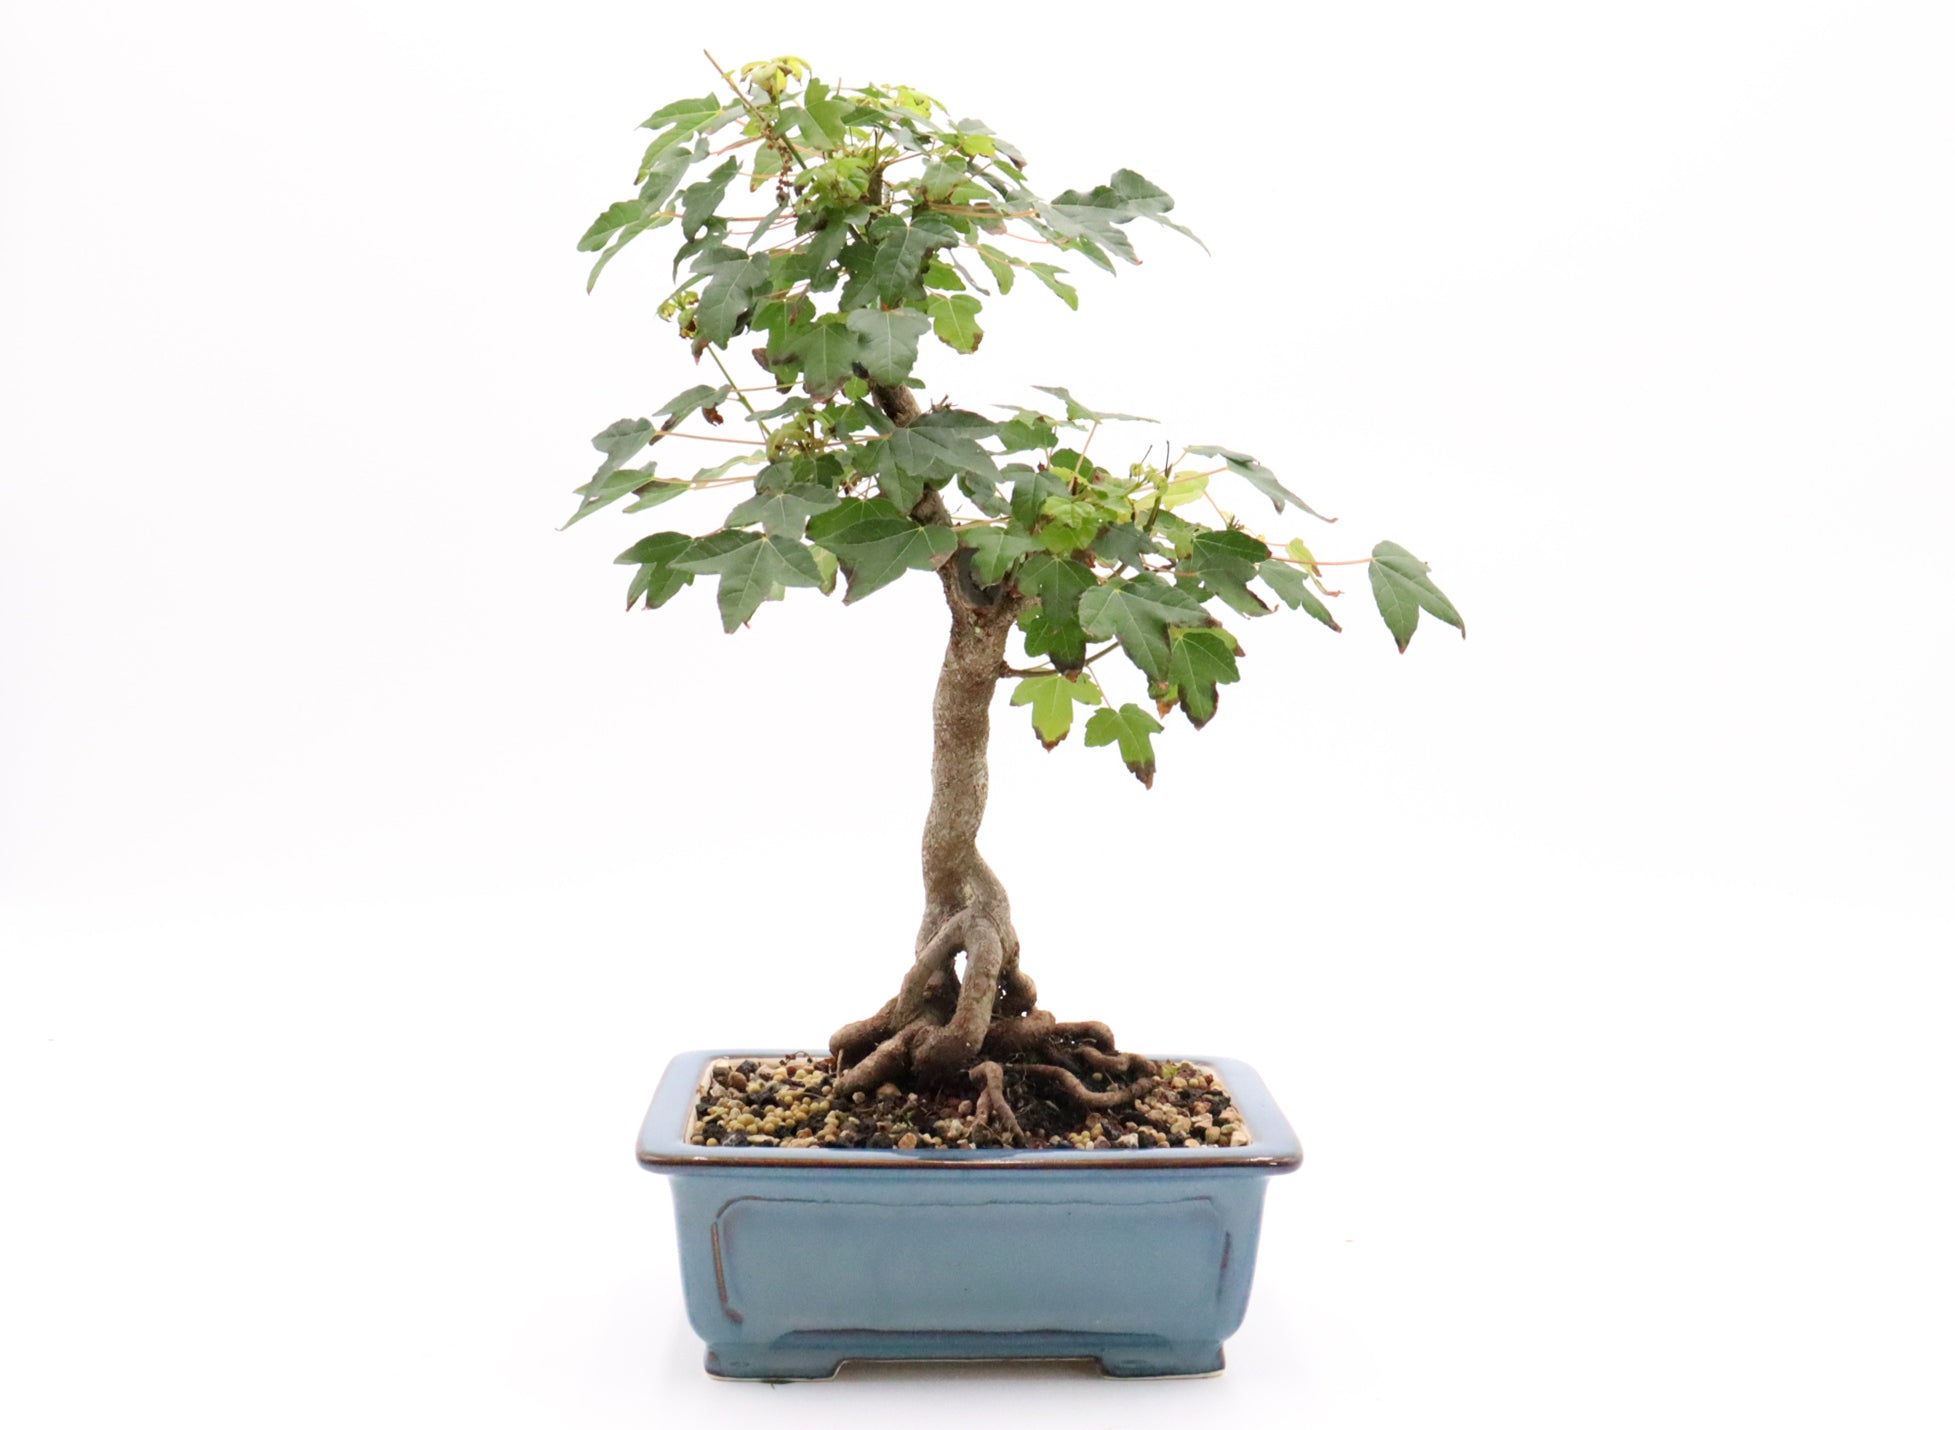 Trident Maple Bonsai in a Glazed Container